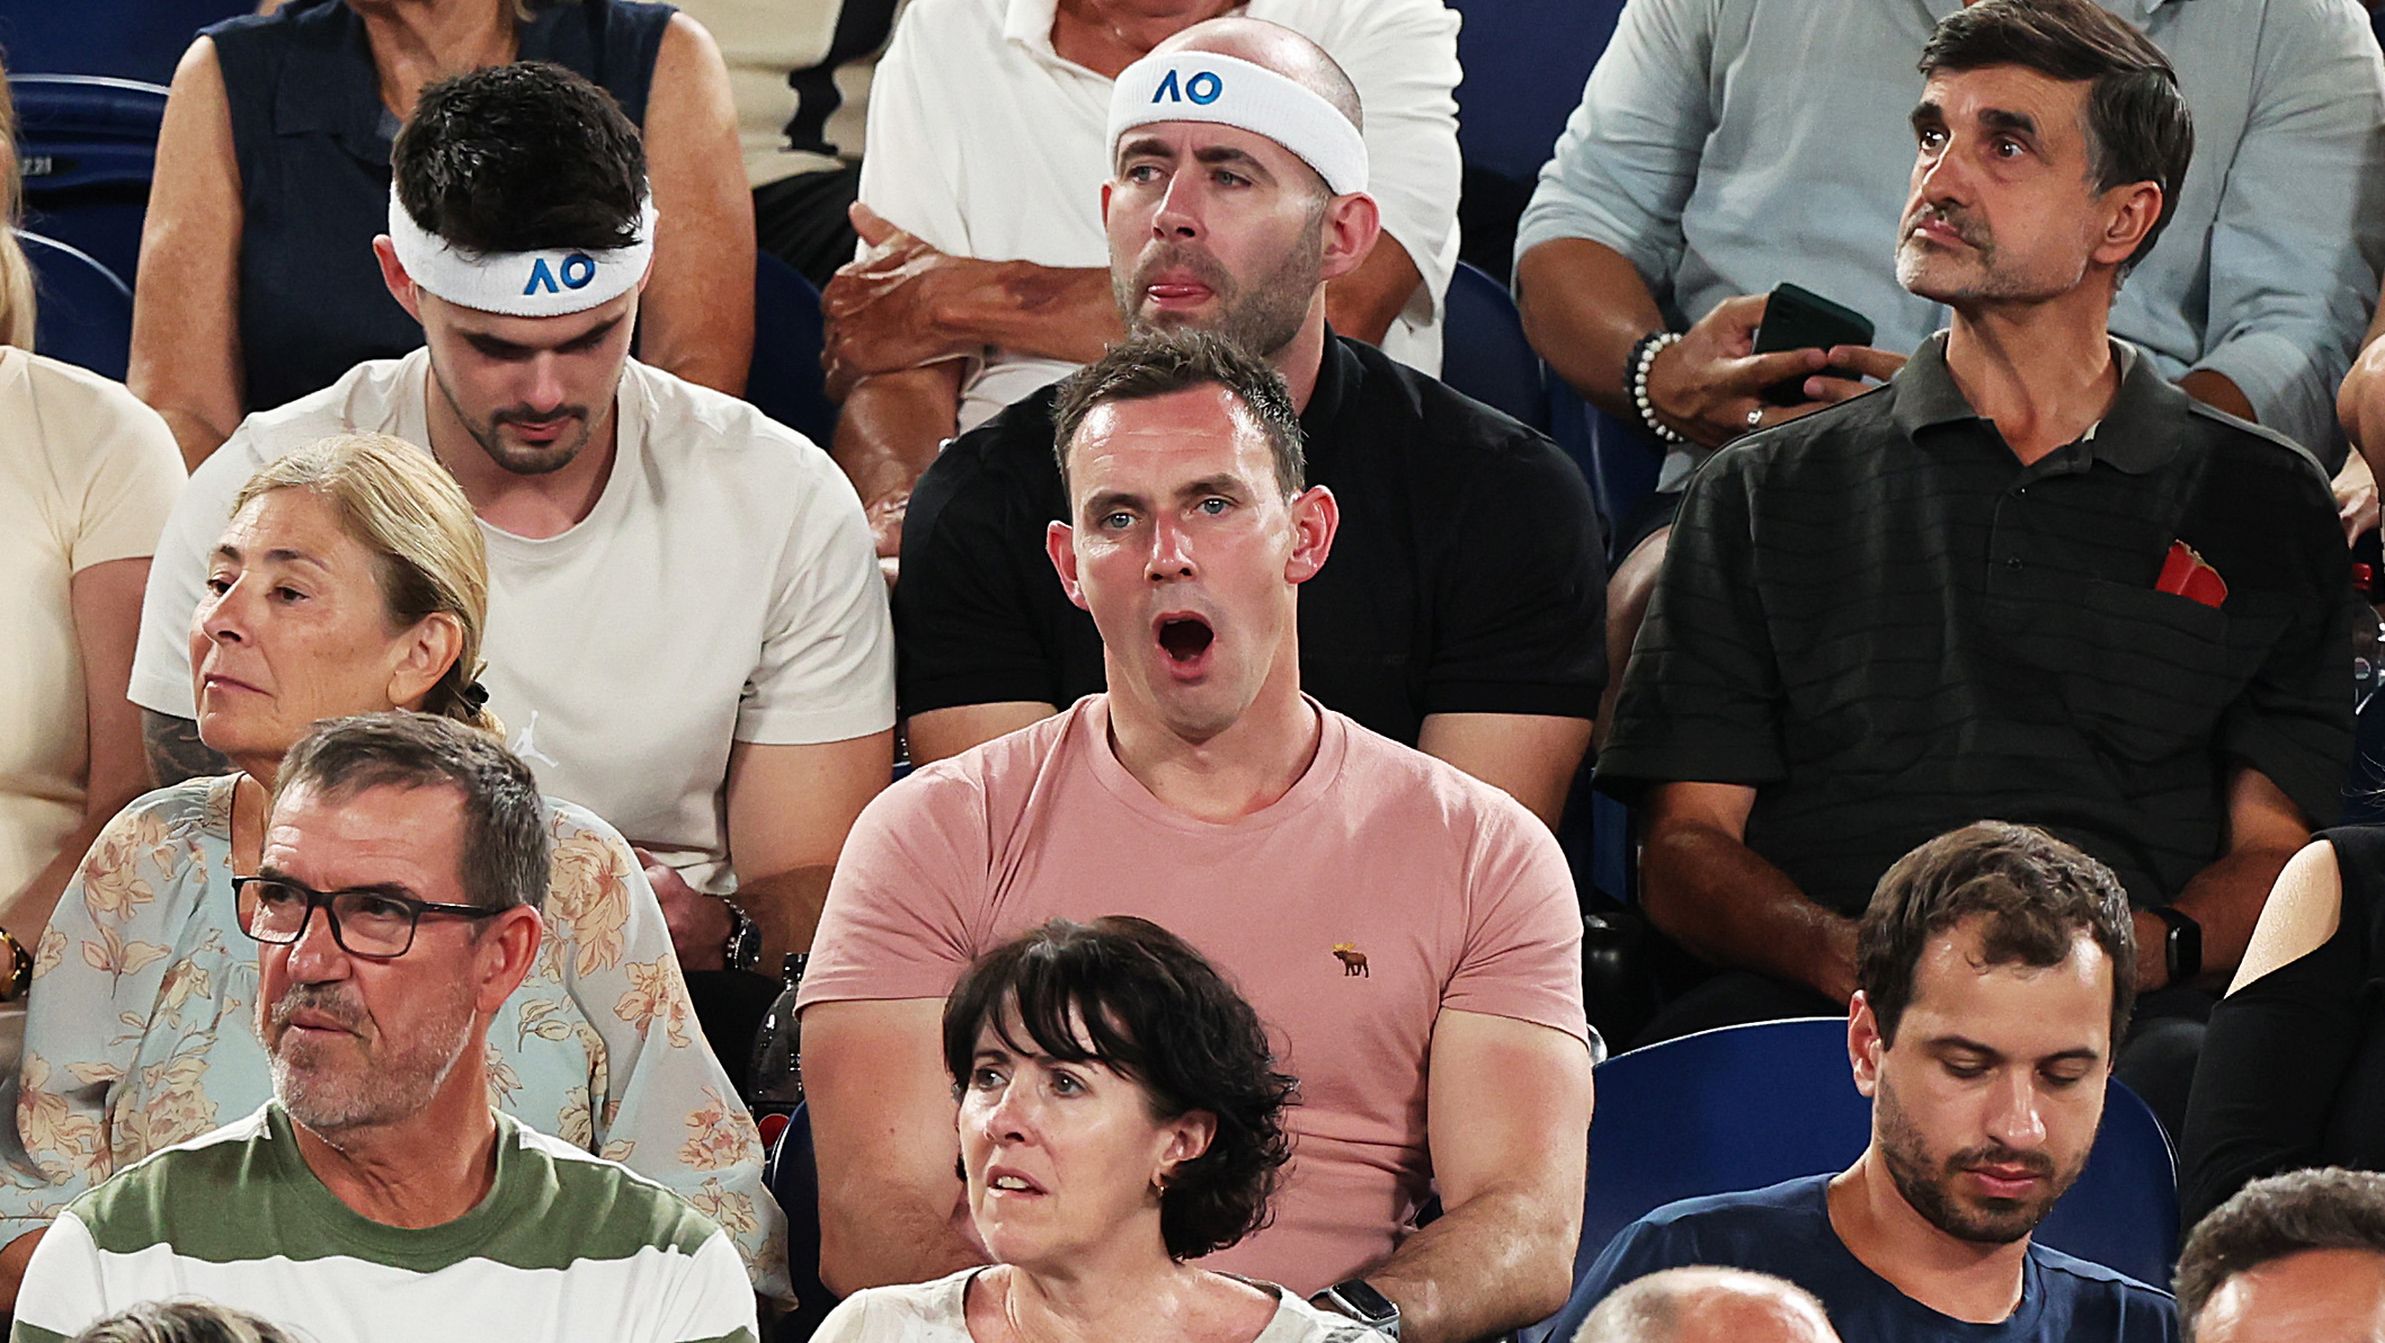 A fan among the crowd yawns mid-way through the quarter-final between Jannik Sinner and Andrey Rublev.